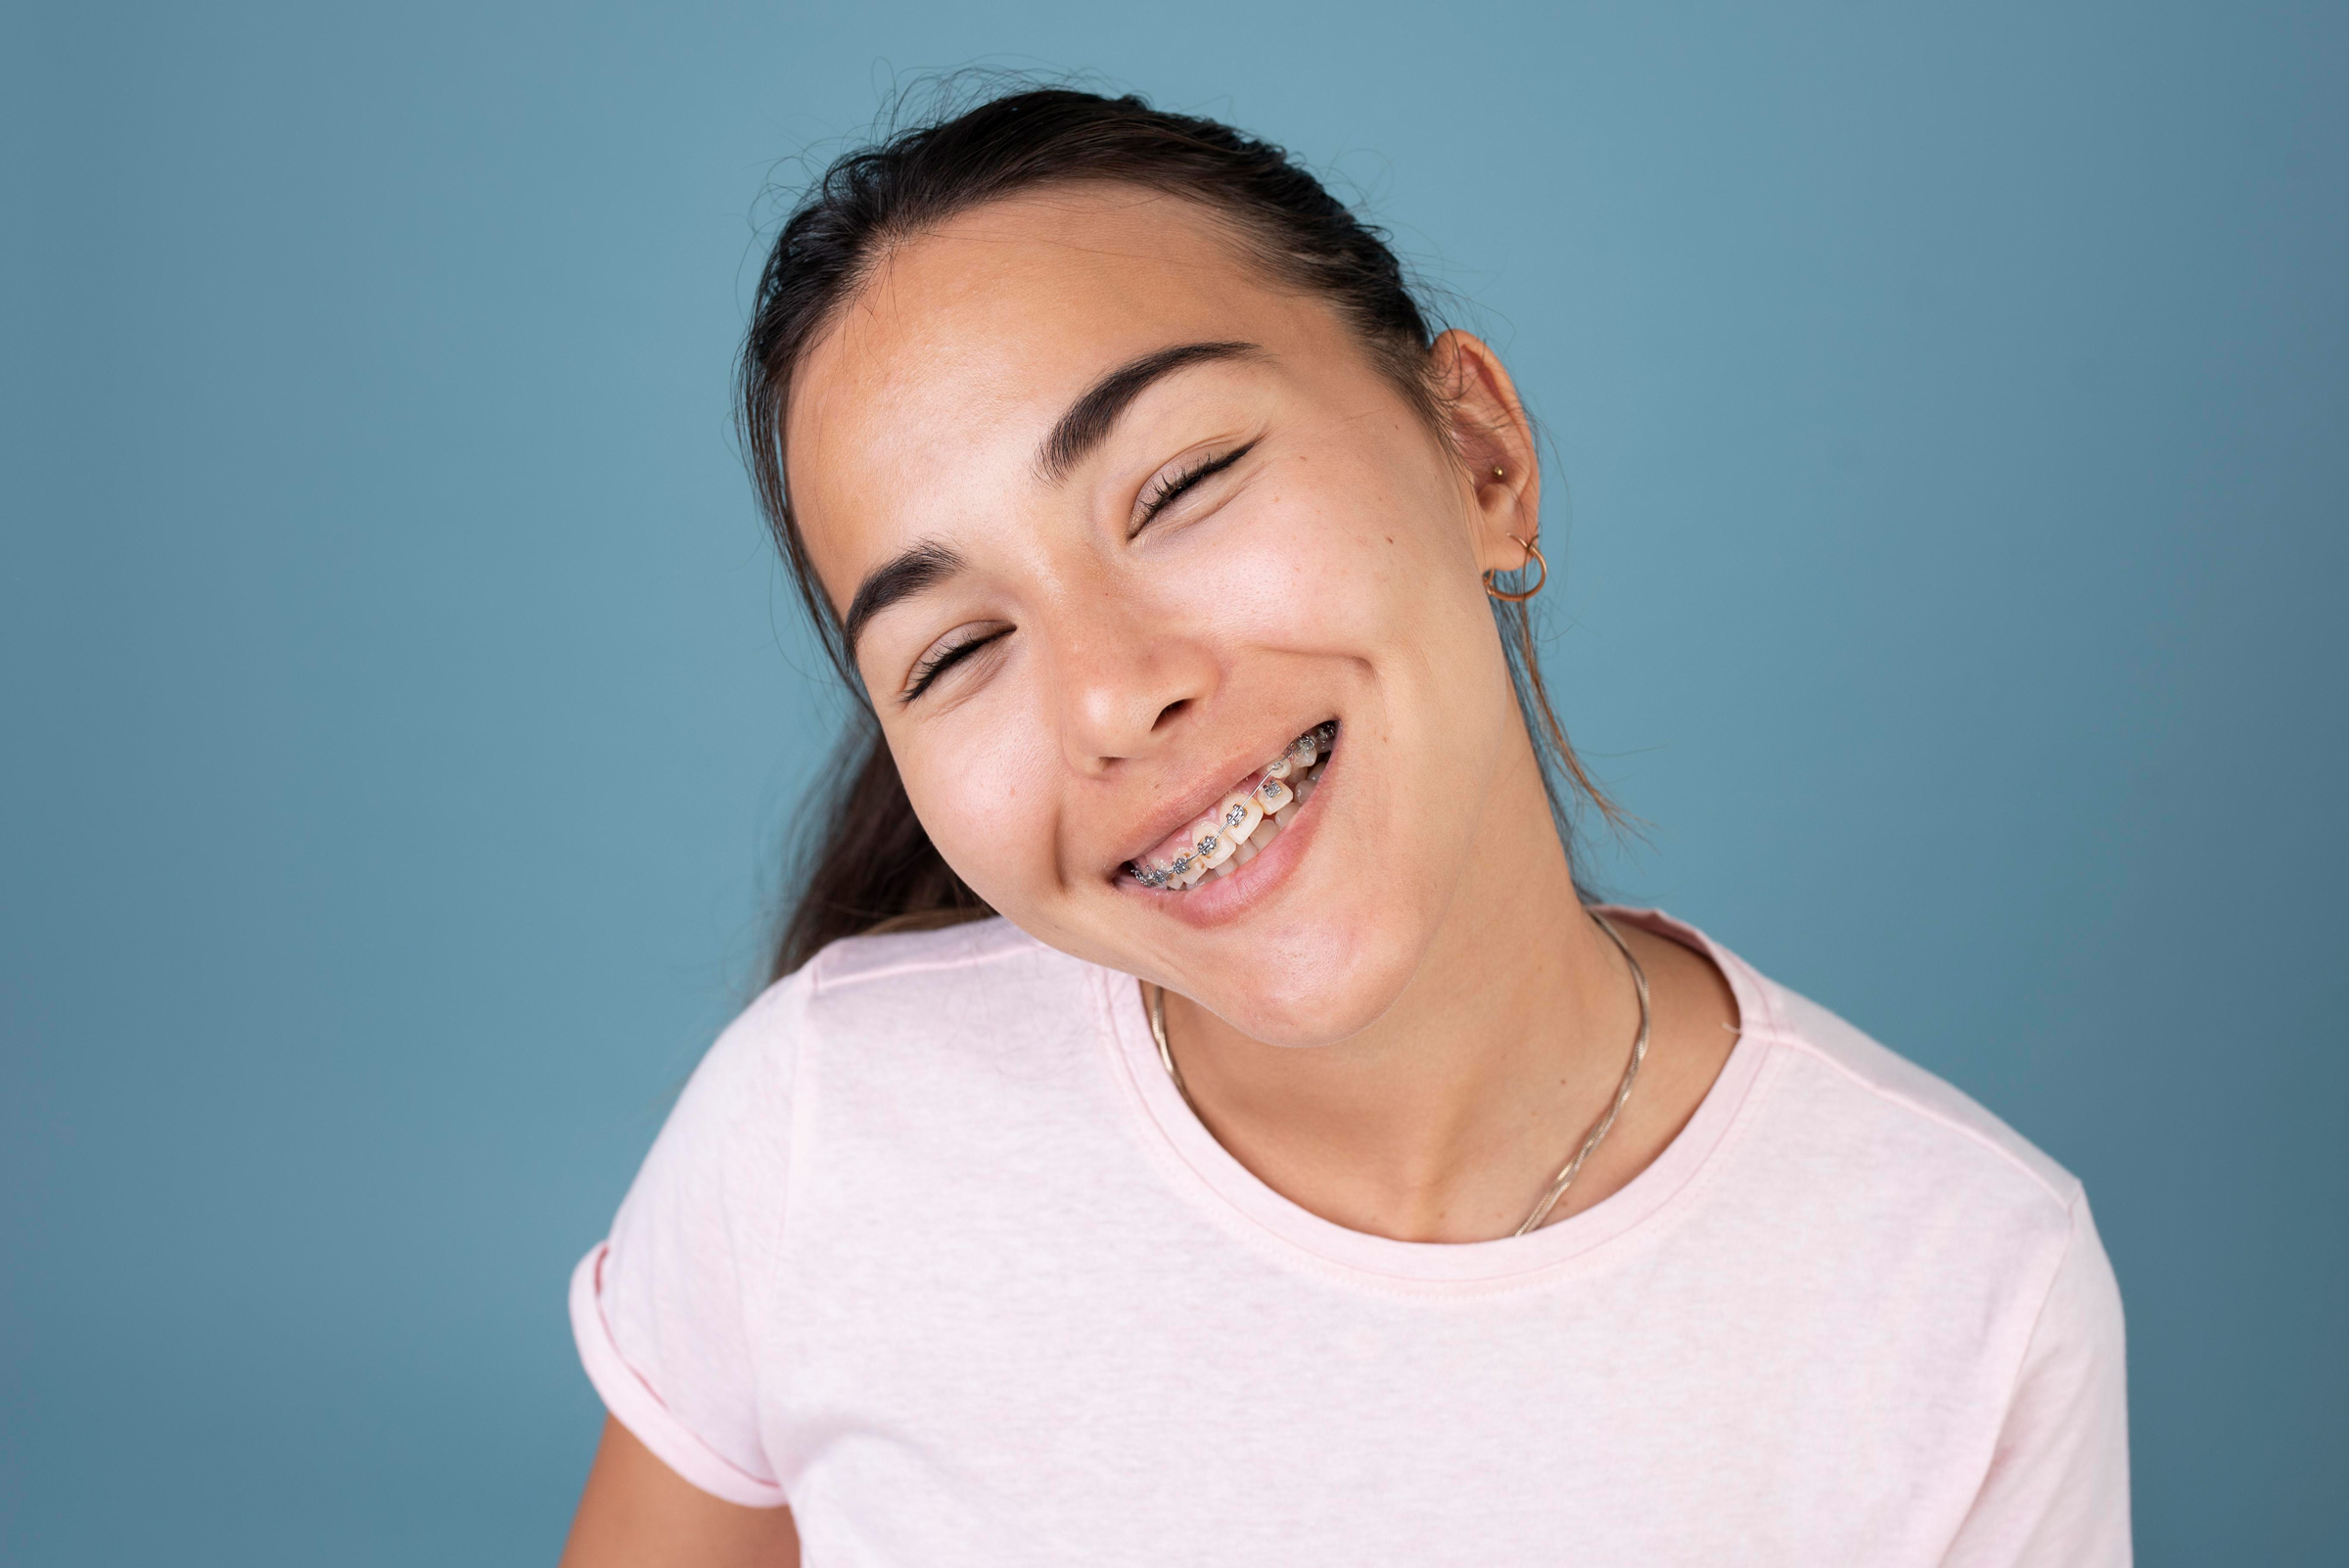 Girl smiling with metal braces for orthodontic treatment, Apex Braces